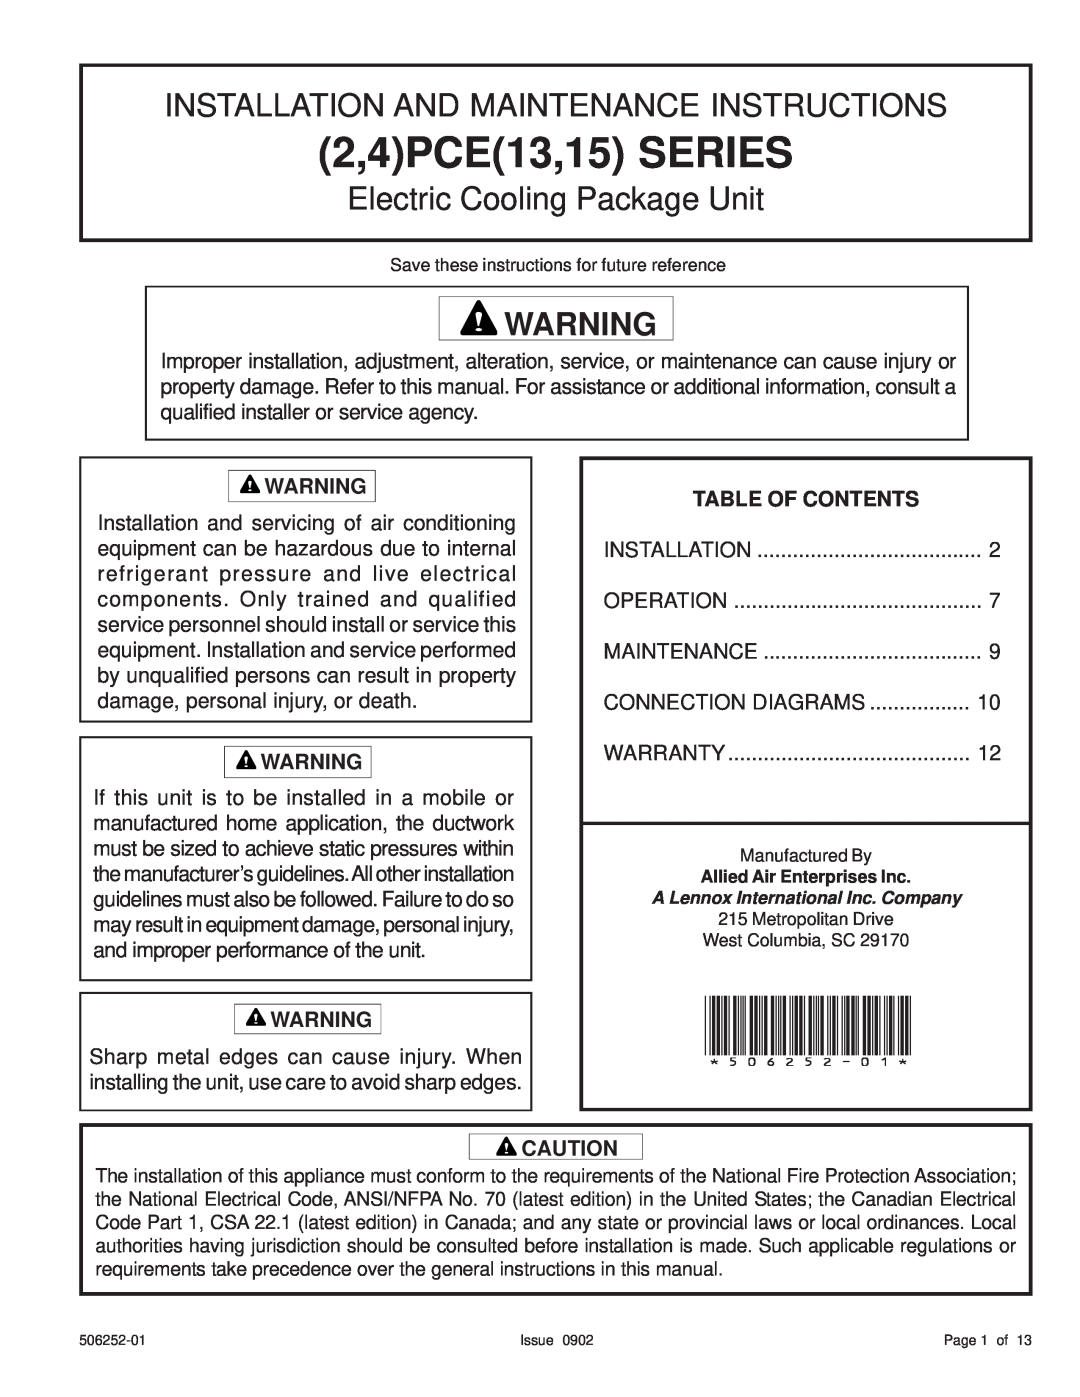 Allied Air Enterprises 15), (2 warranty Table Of Contents, 2,4PCE13,15 SERIES, Installation And Maintenance Instructions 